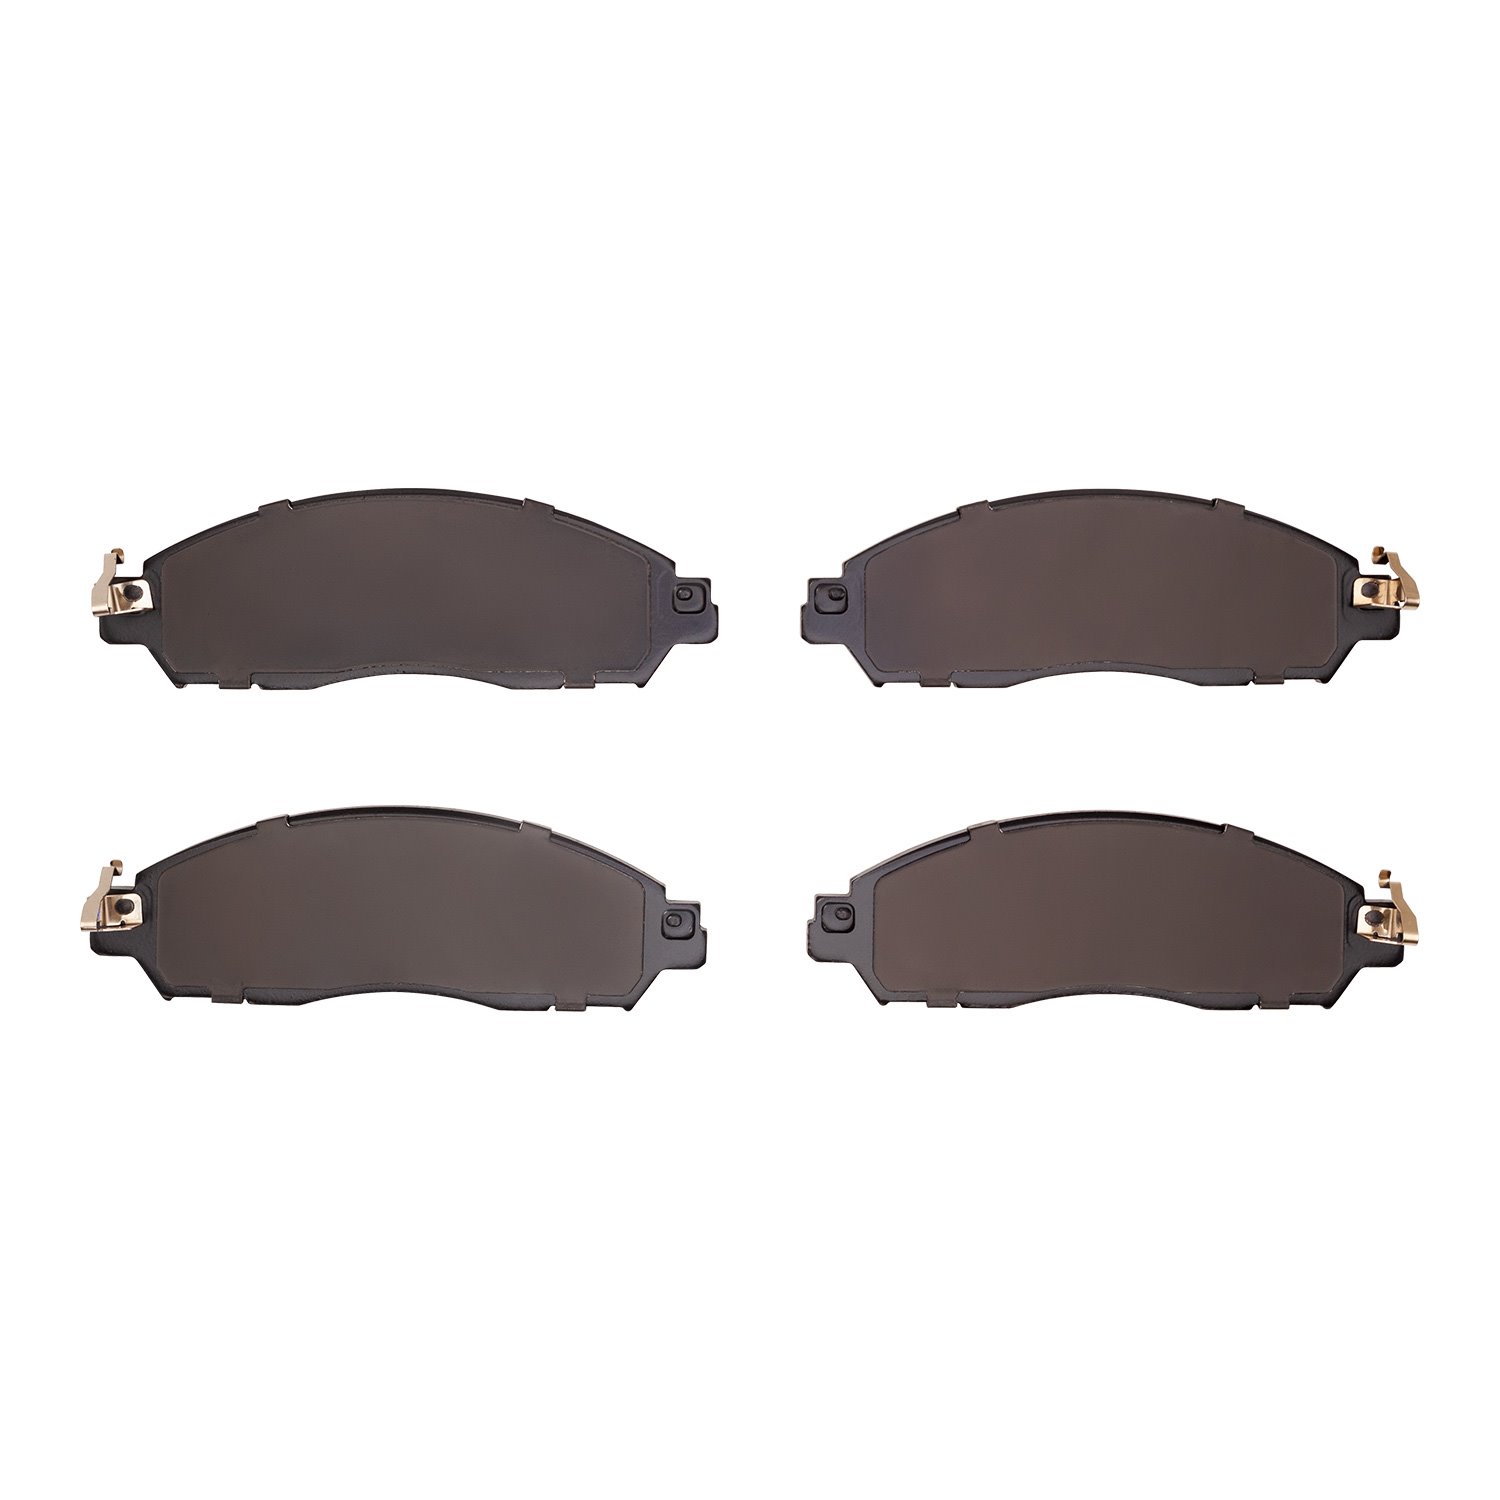 1551-2138-00 5000 Advanced Ceramic Brake Pads, Fits Select Infiniti/Nissan, Position: Front